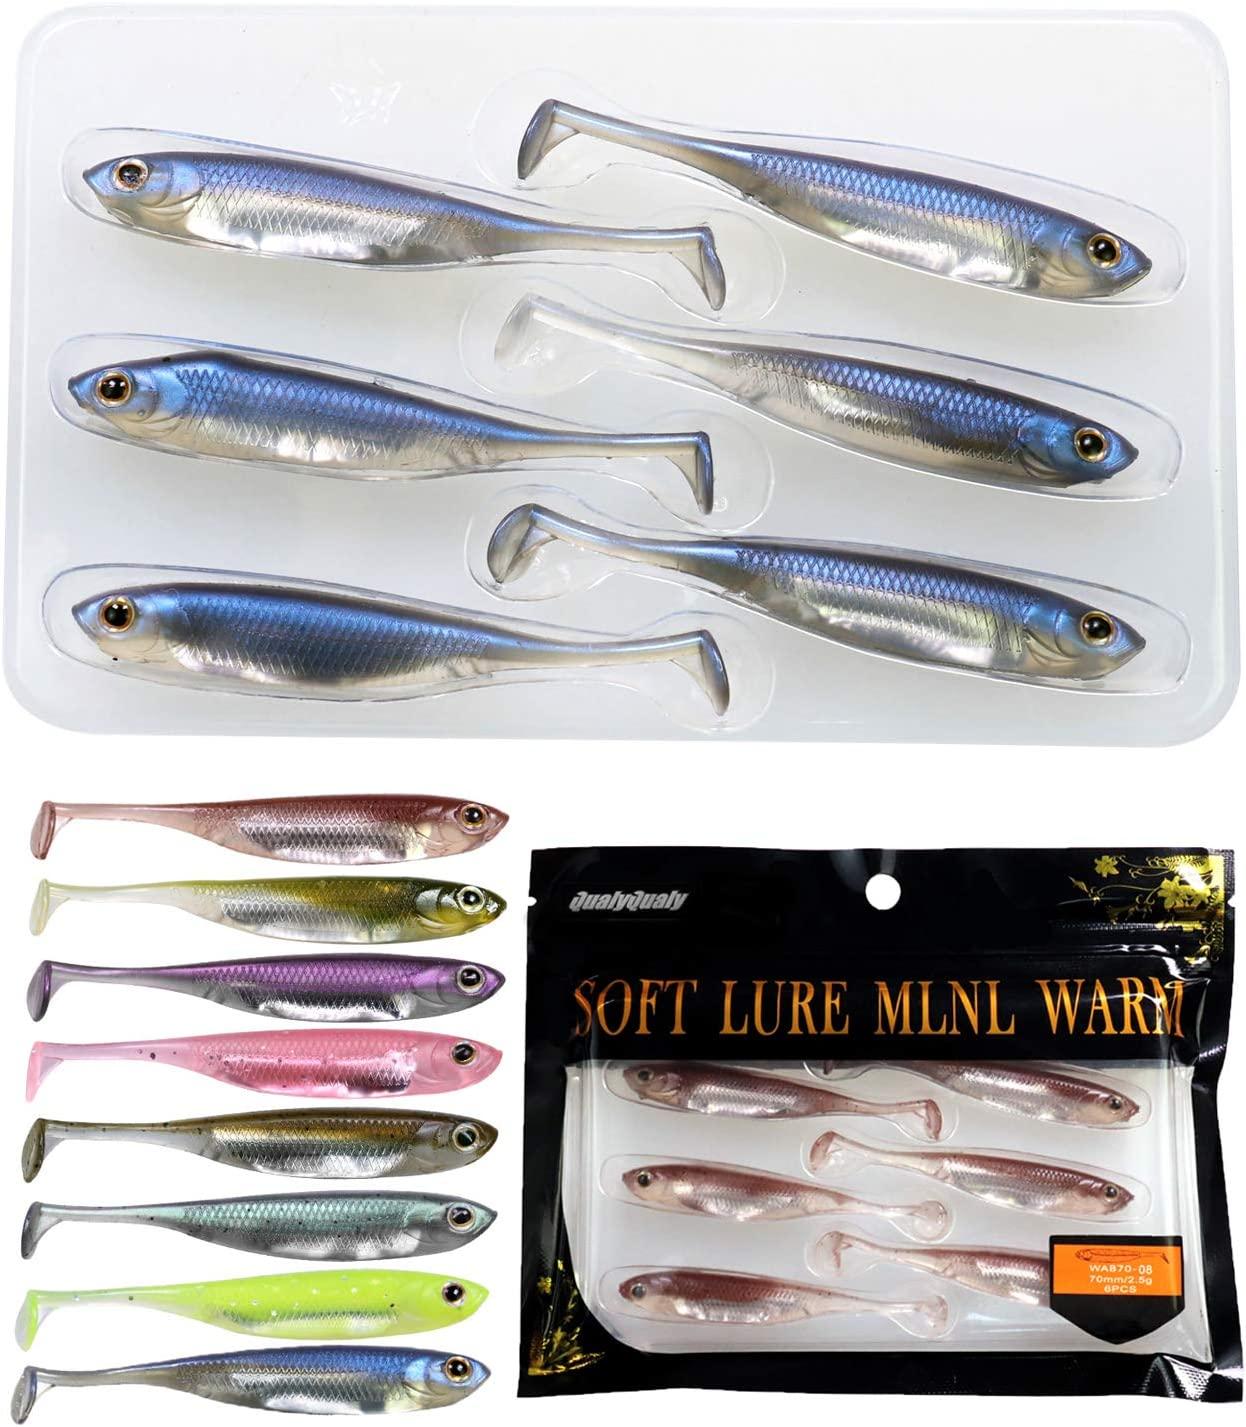 QualyQualy Soft Plastic Lures Swimbait Paddle Tail Shad Lure Bass Bait Shad  Minnow Soft Bait for Trout Walleye Crappie Pike 2.75in 3.14in 3.94in (Color  5, 3.14 - 6Pcs), Soft Plastic Lures -  Canada